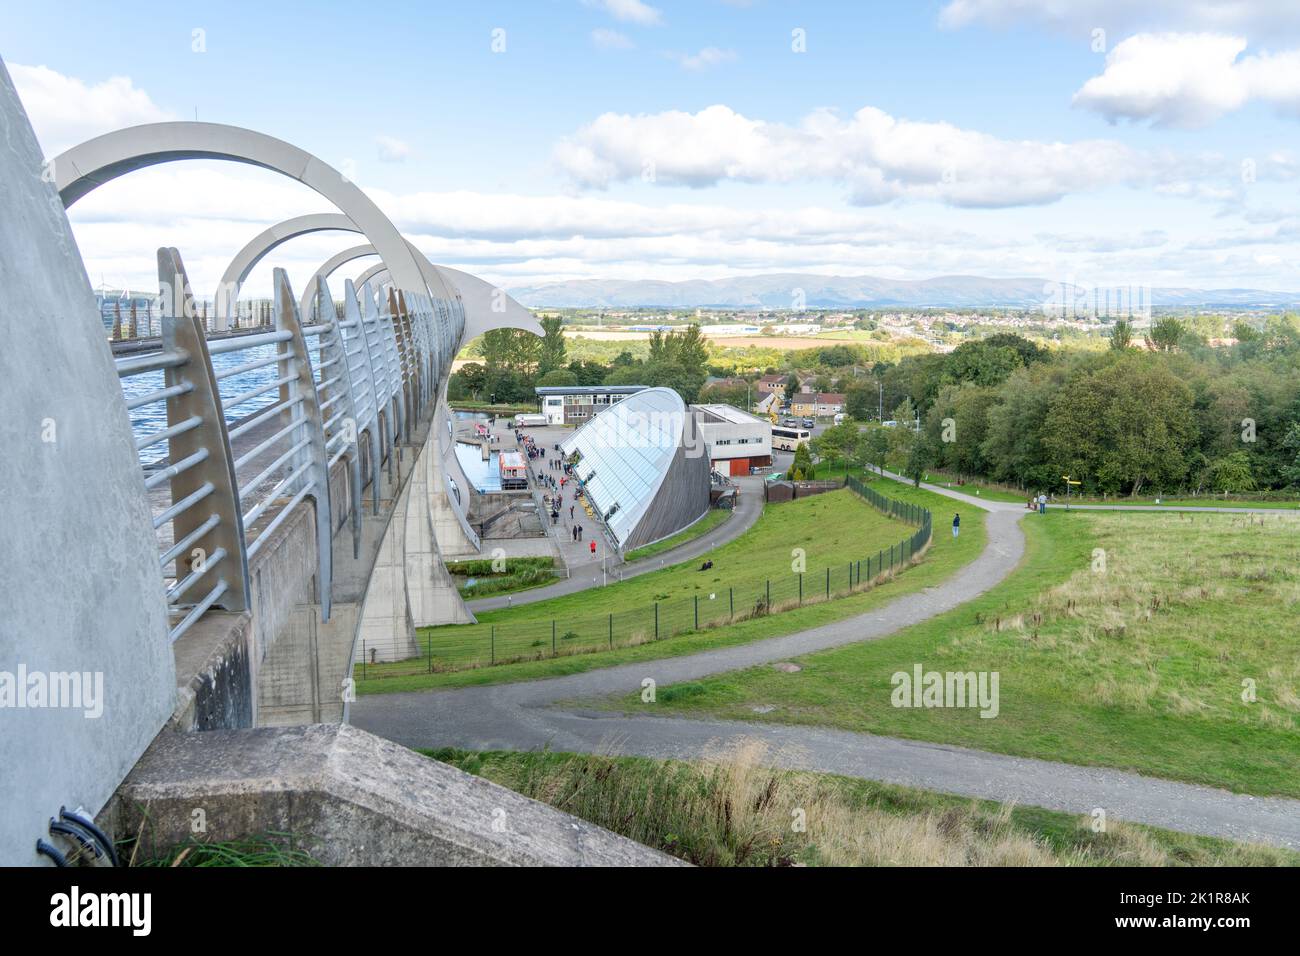 The Falkirk Wheel rotating boat lift connecting the Forth and Clyde Canal in Falkirk, Scotland, UK Stock Photo